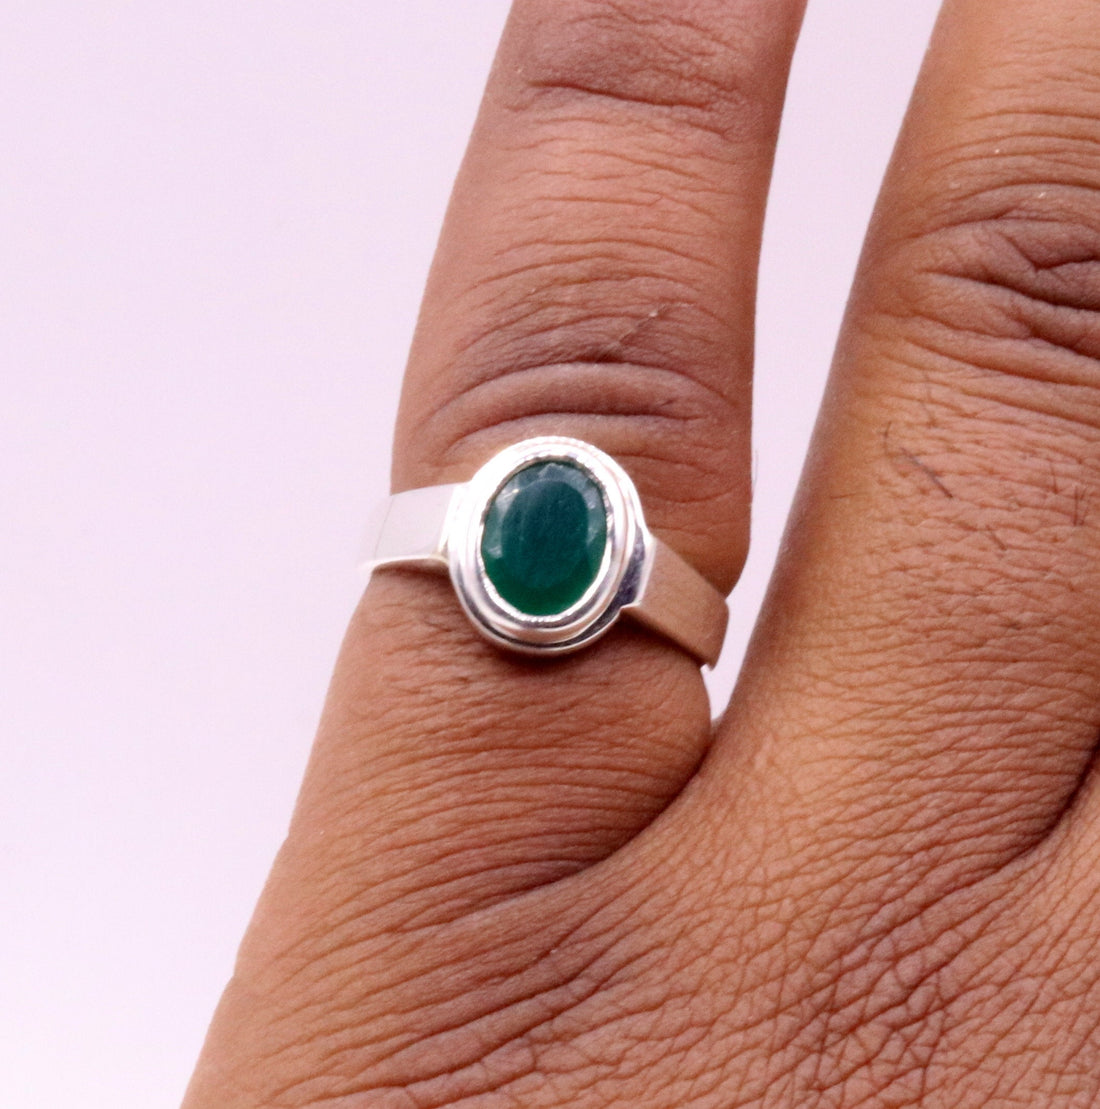 925 sterling silver handmade green onyx stone unisex ring fabulous band from rajasthan india - TRIBAL ORNAMENTS